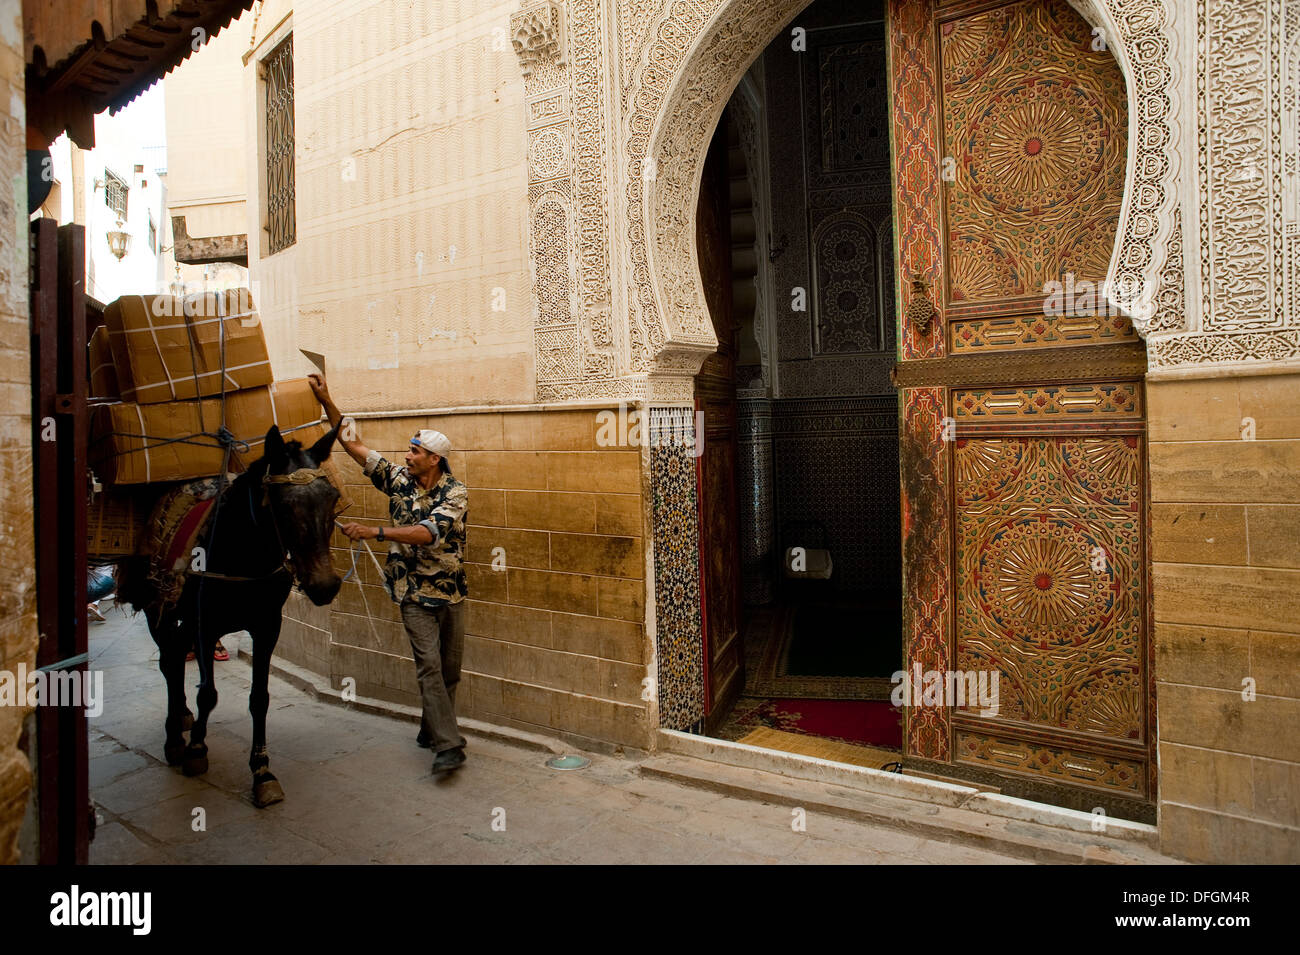 Horse carrying goods in a street of the 'medina' ( old town). At the right, one of the entrance of the Sidi Ahmed Tijani mosque. Stock Photo